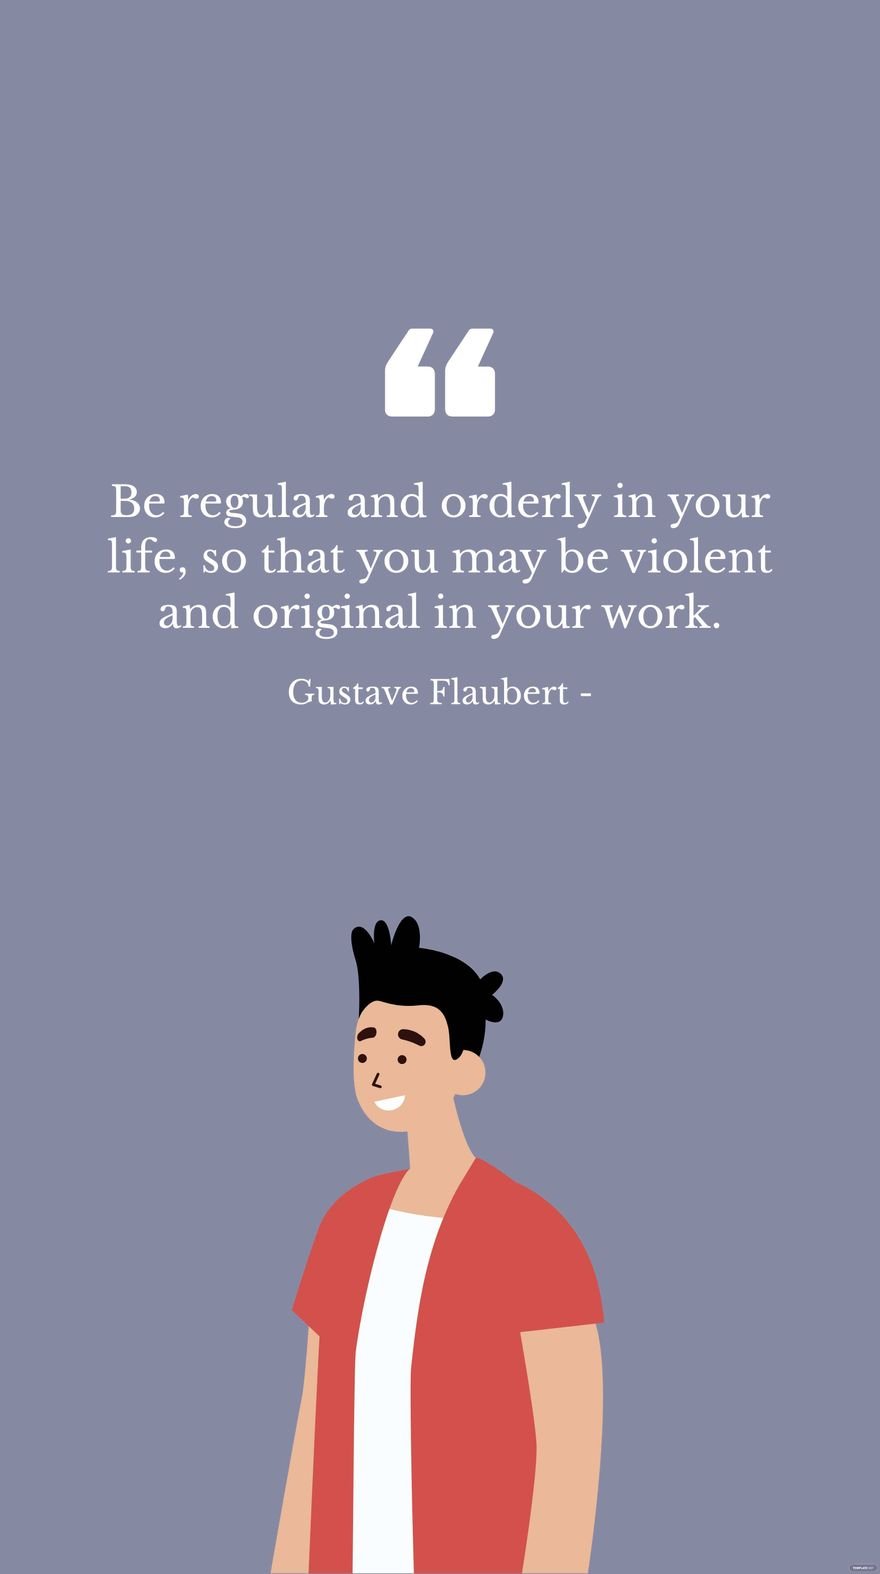 Gustave Flaubert - Be regular and orderly in your life, so that you may be violent and original in your work.